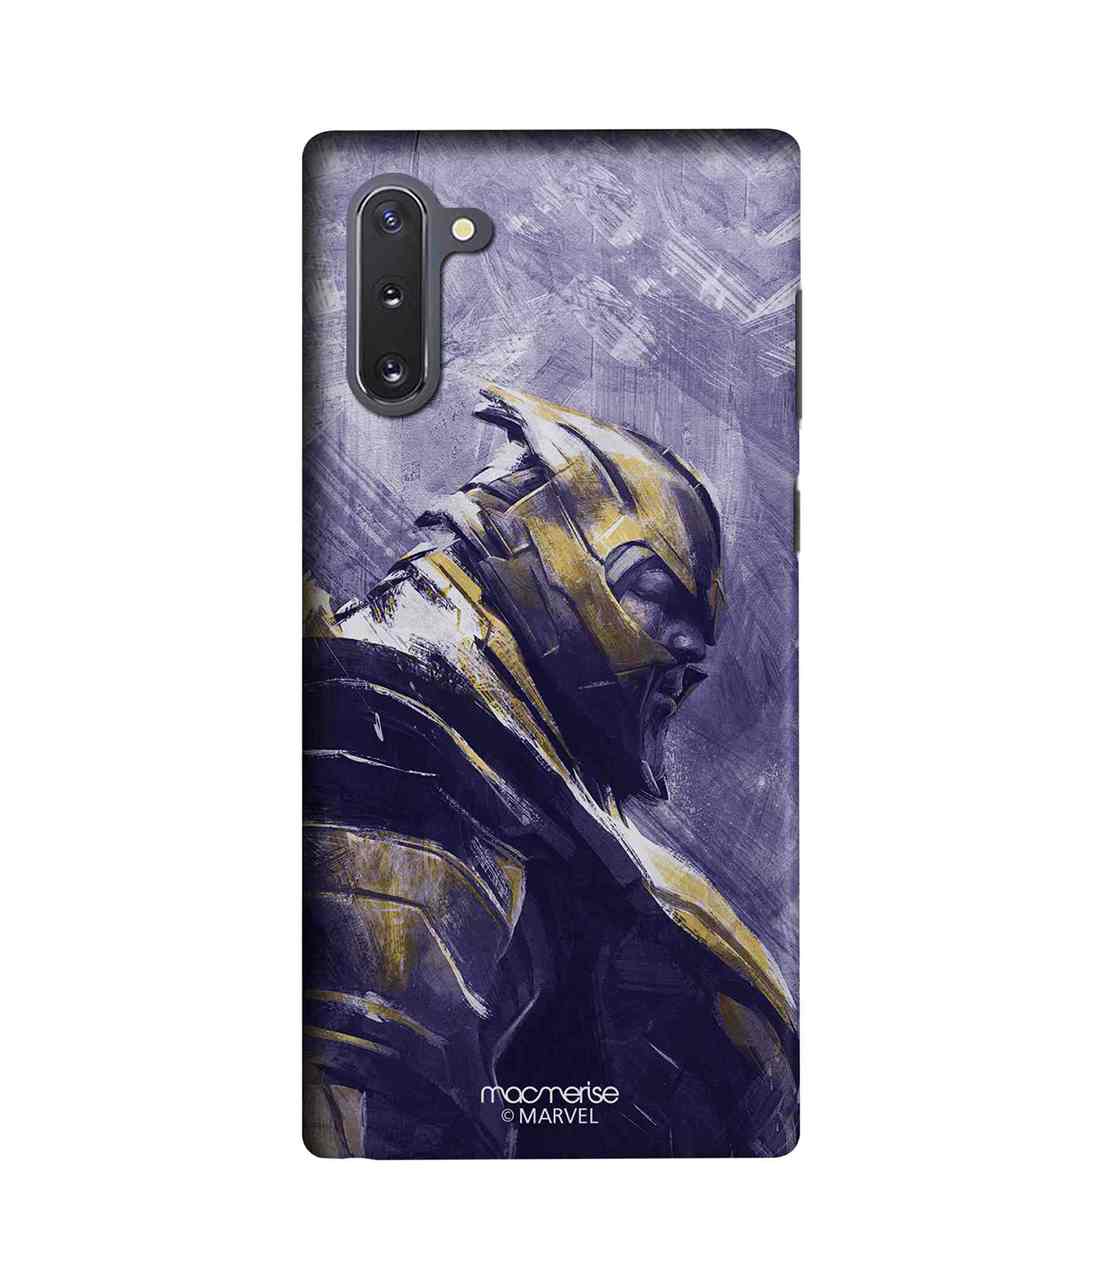 Buy Thanos suited up - Sleek Phone Case for Samsung Note10 Online